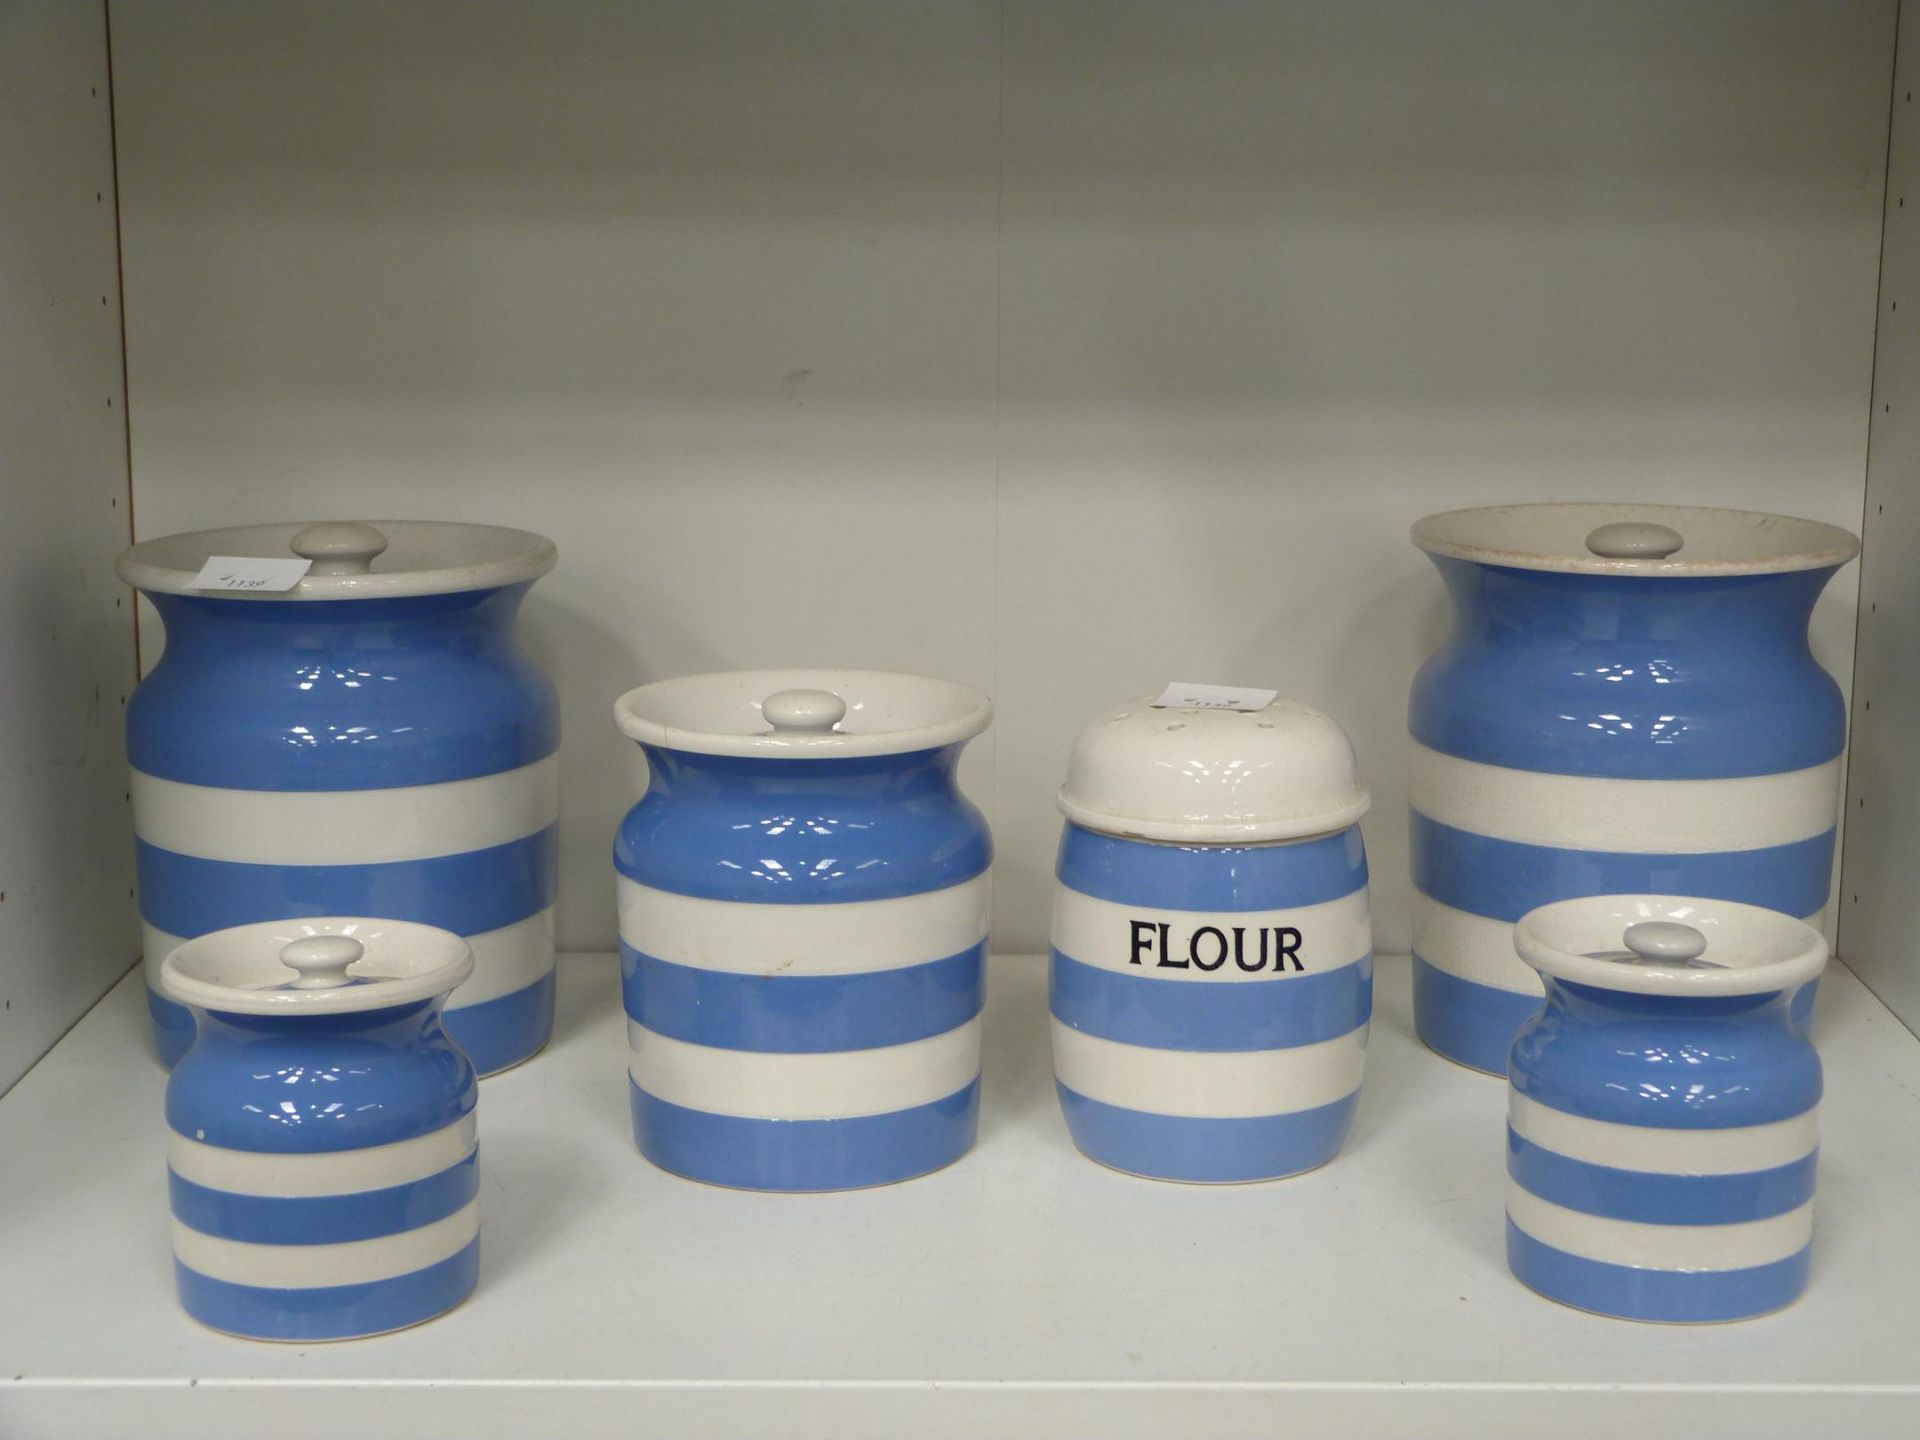 Six Pieces of Cornish Ware T.G Green to include one Flour Jar, two large Storage Jars, two small